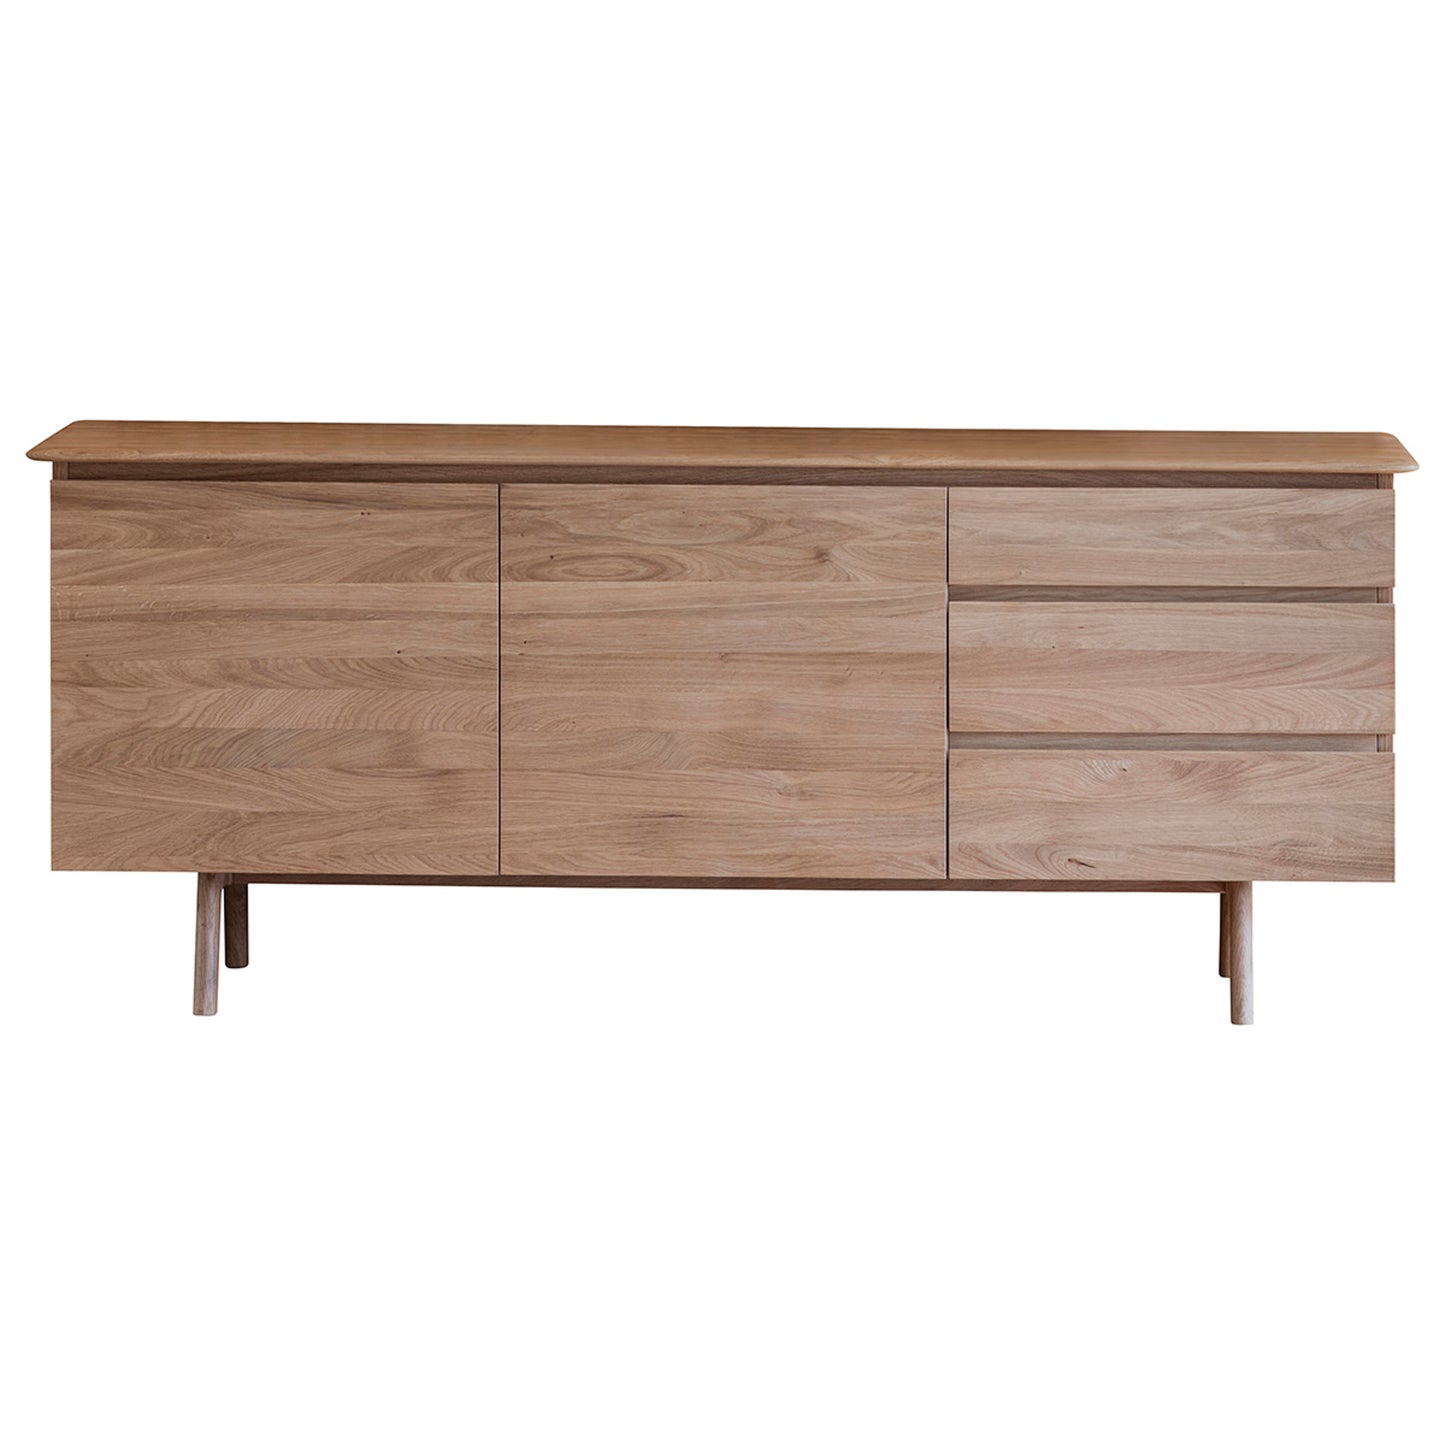 A stylish interior decor 2 Door 3 Drawer Sideboard with two drawers and two doors by Kikiathome.co.uk.